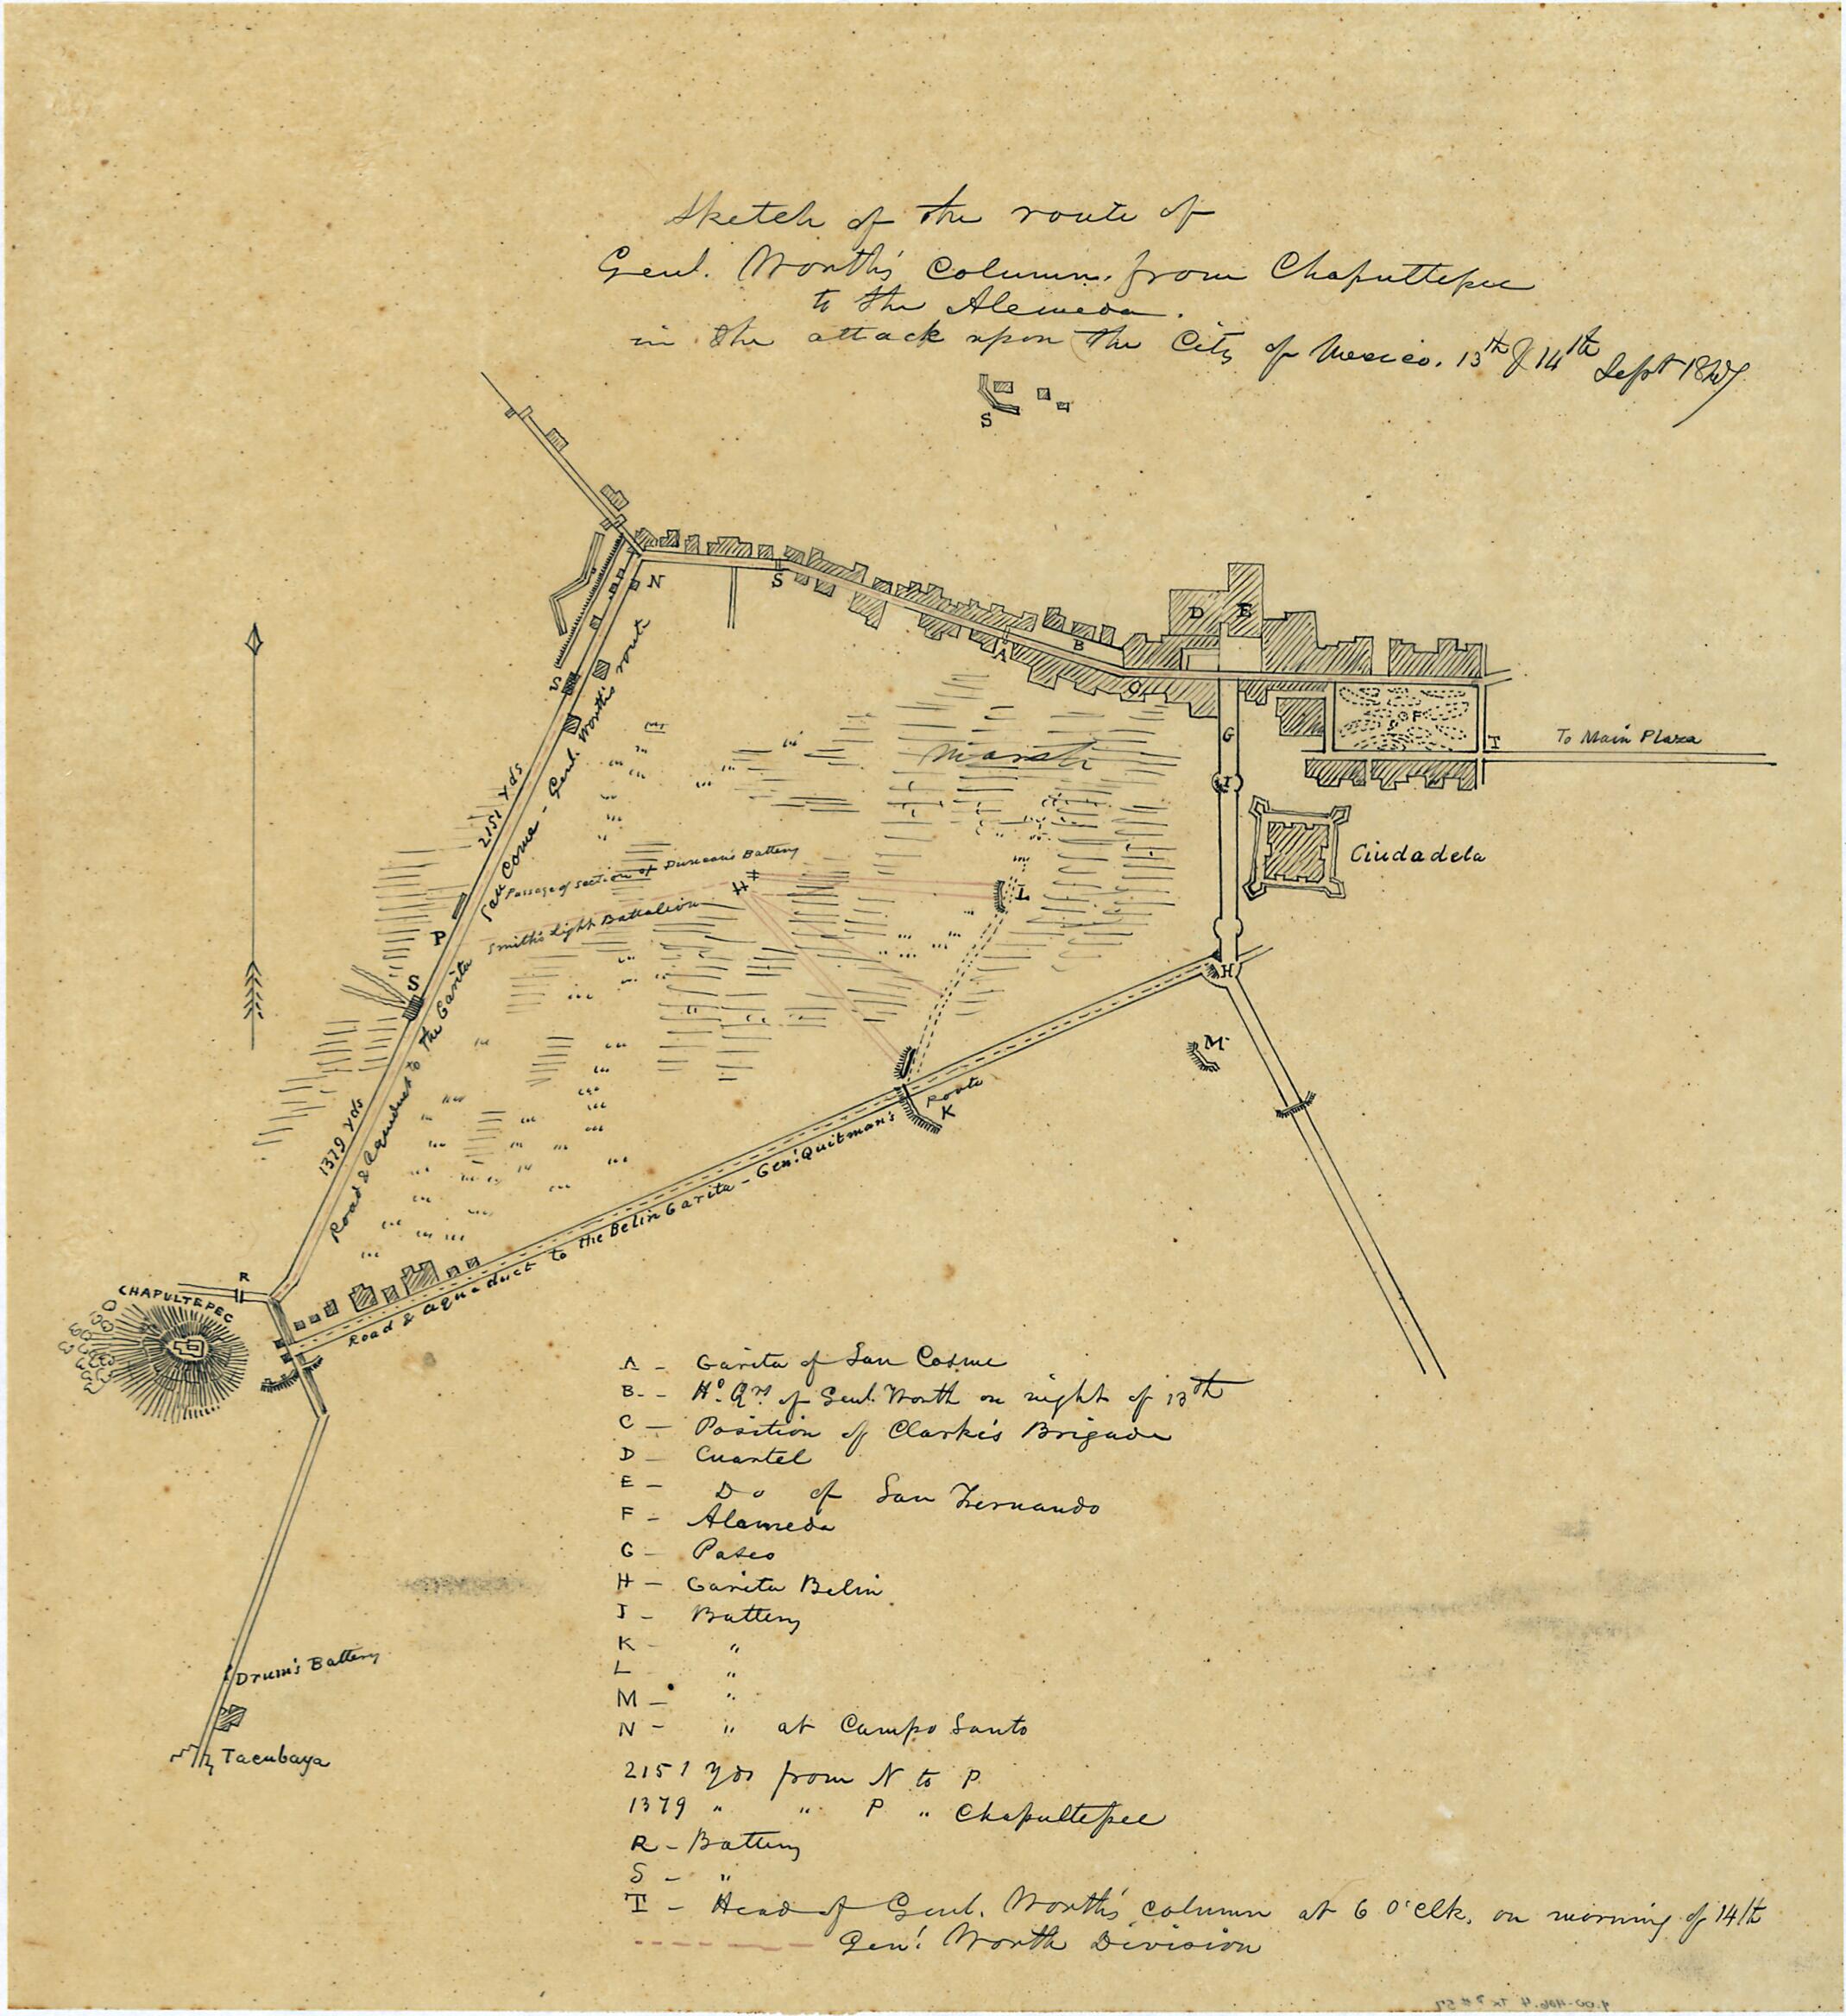 This old map of Sketch of the Route of Genl. Worth&